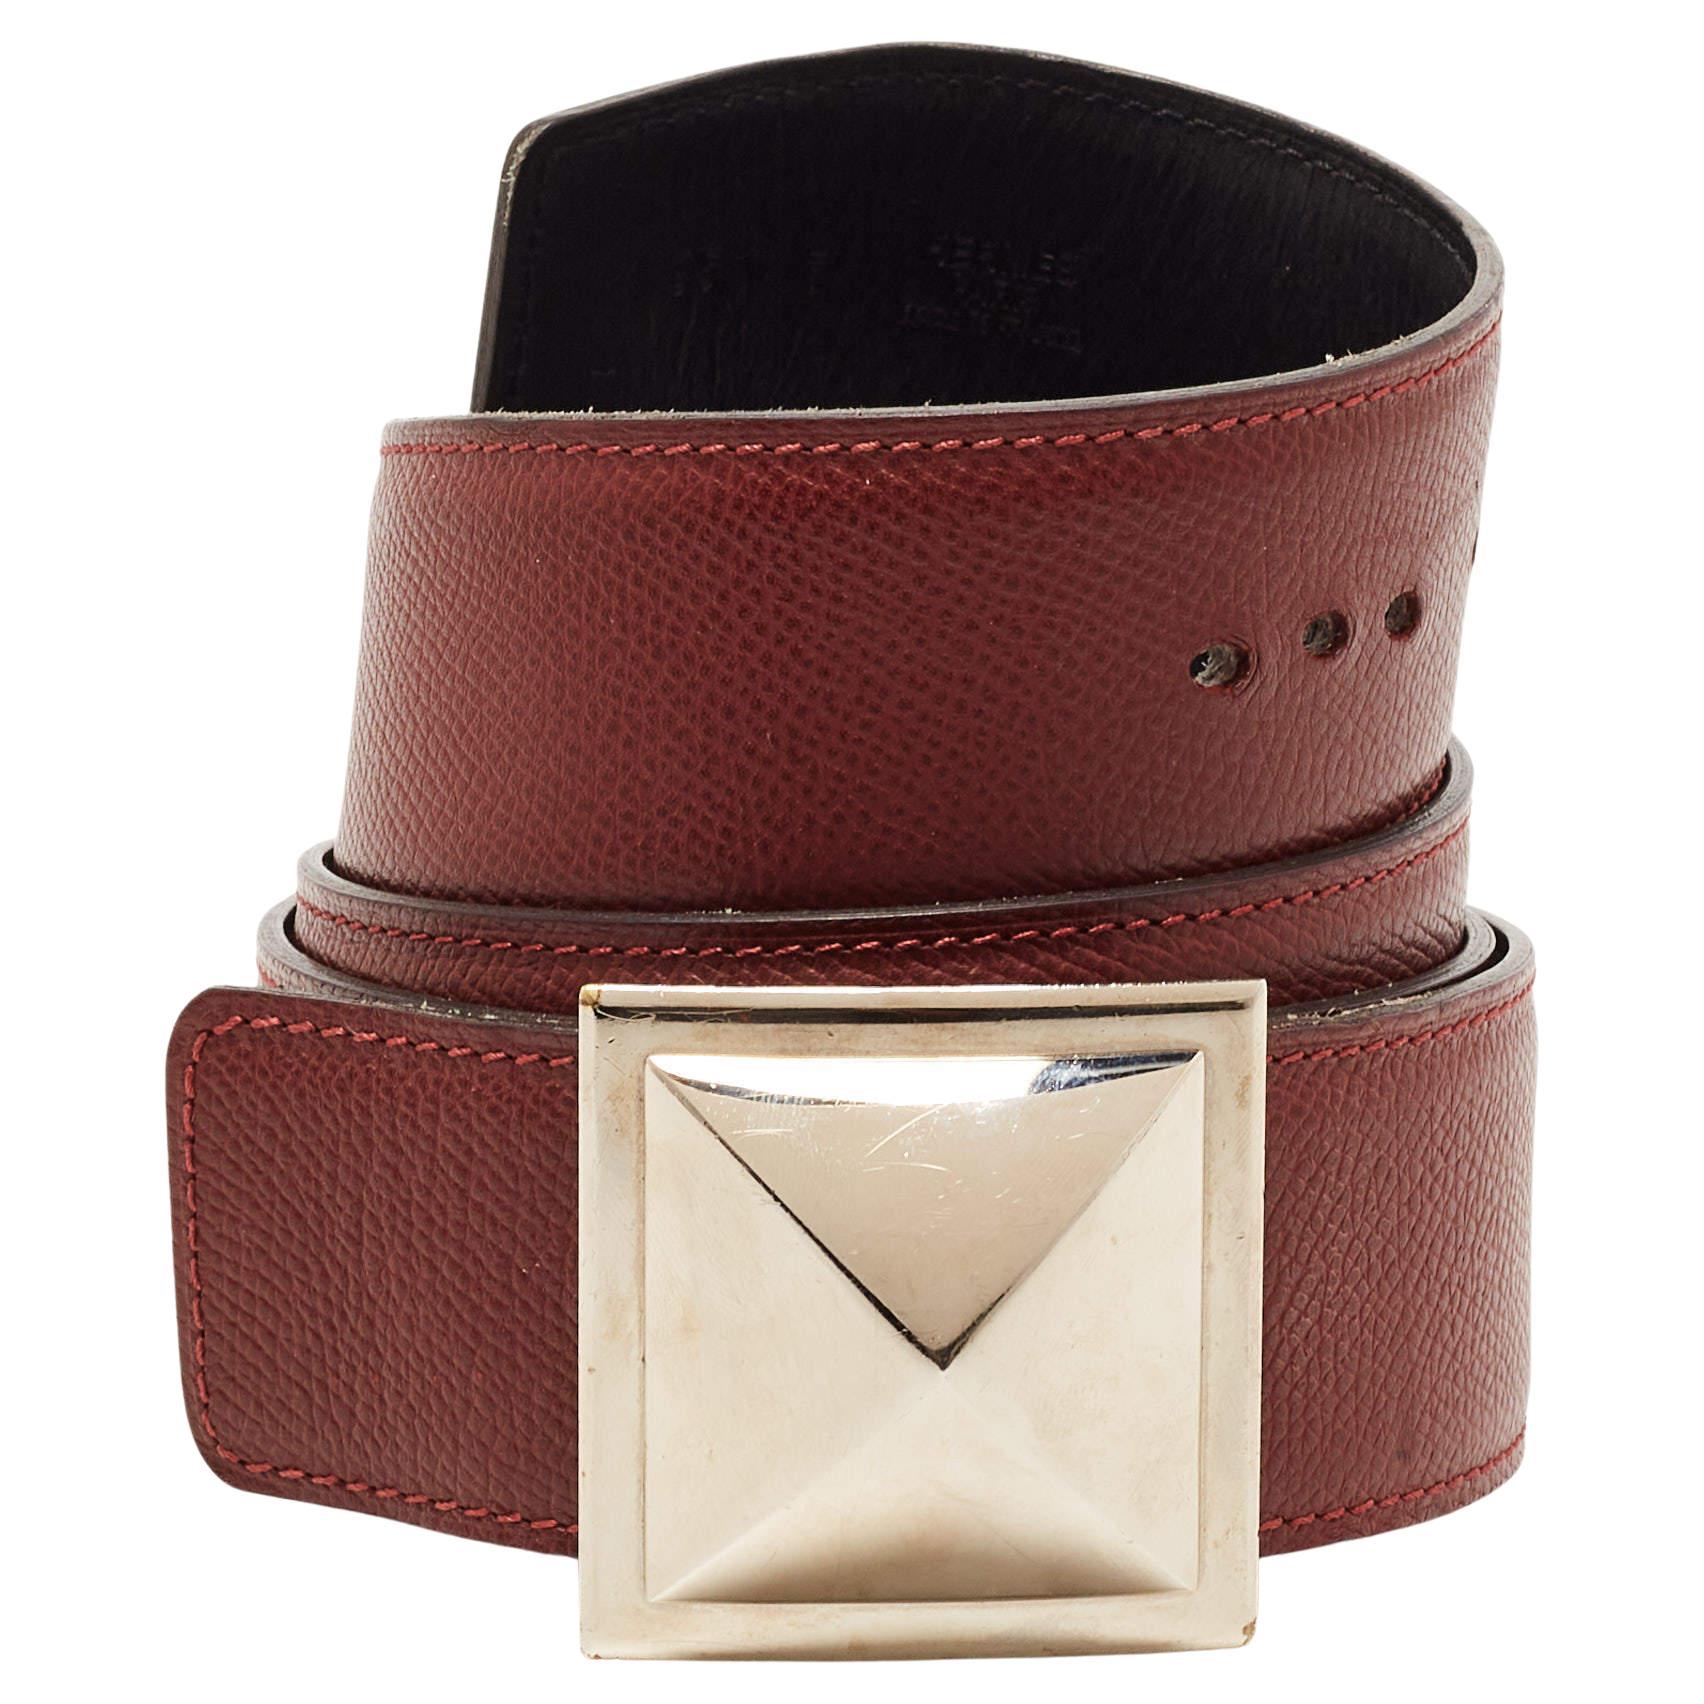 Leather belt with turn lock instead of buckle (inspired by Hermes